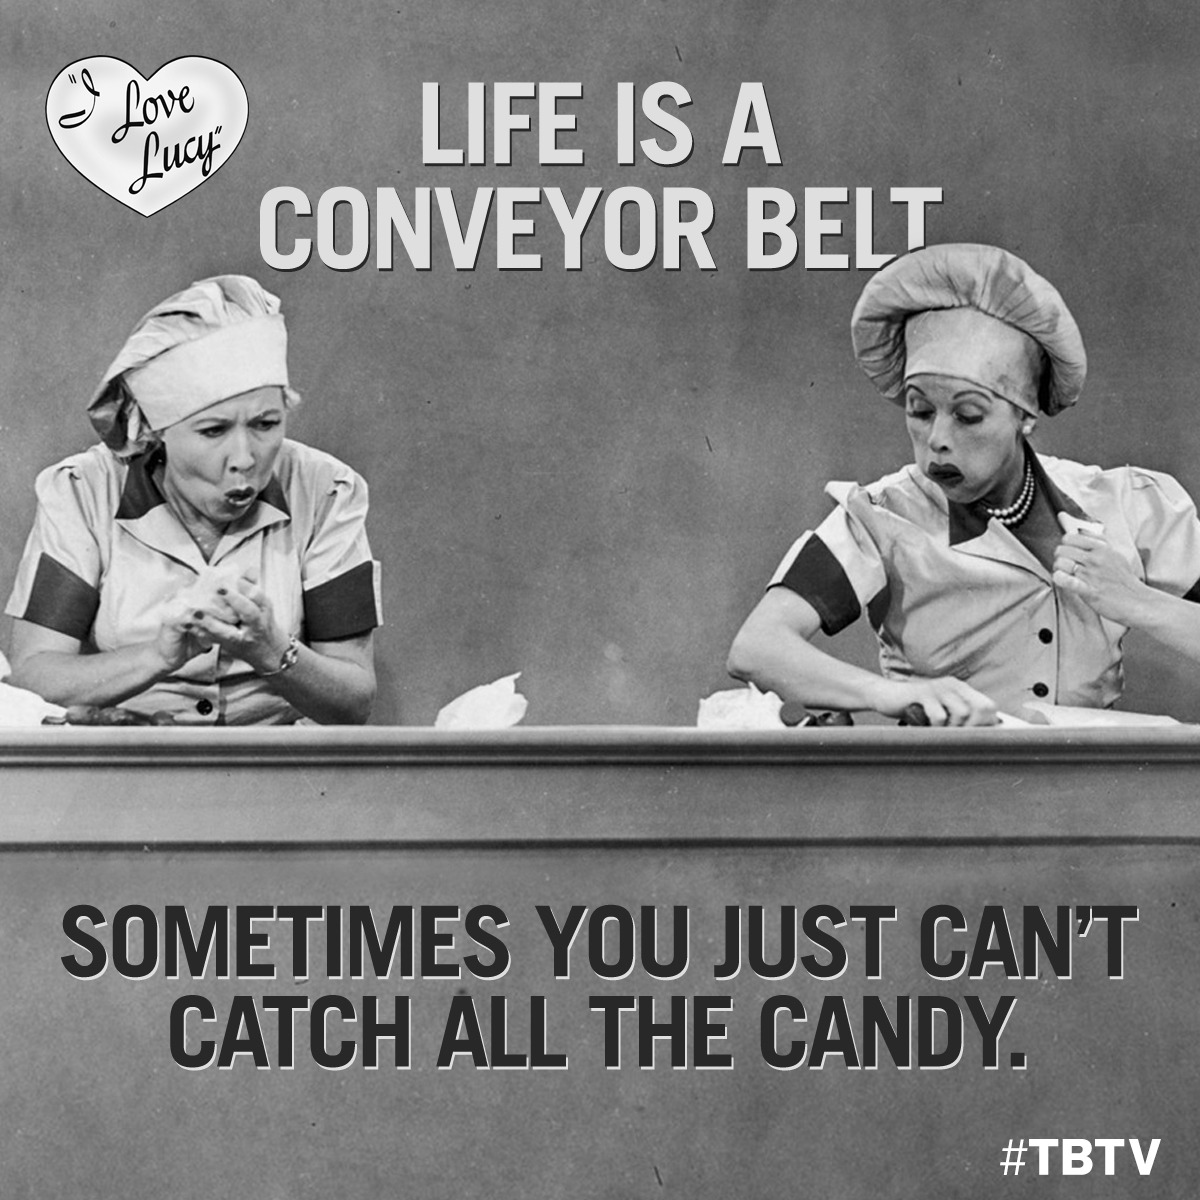 For #TBTV (Throwback Television) today, we’re catching the sweet candy that is I Love Lucy. Then maybe Ricky will put us in the show. What’s your favorite episode?